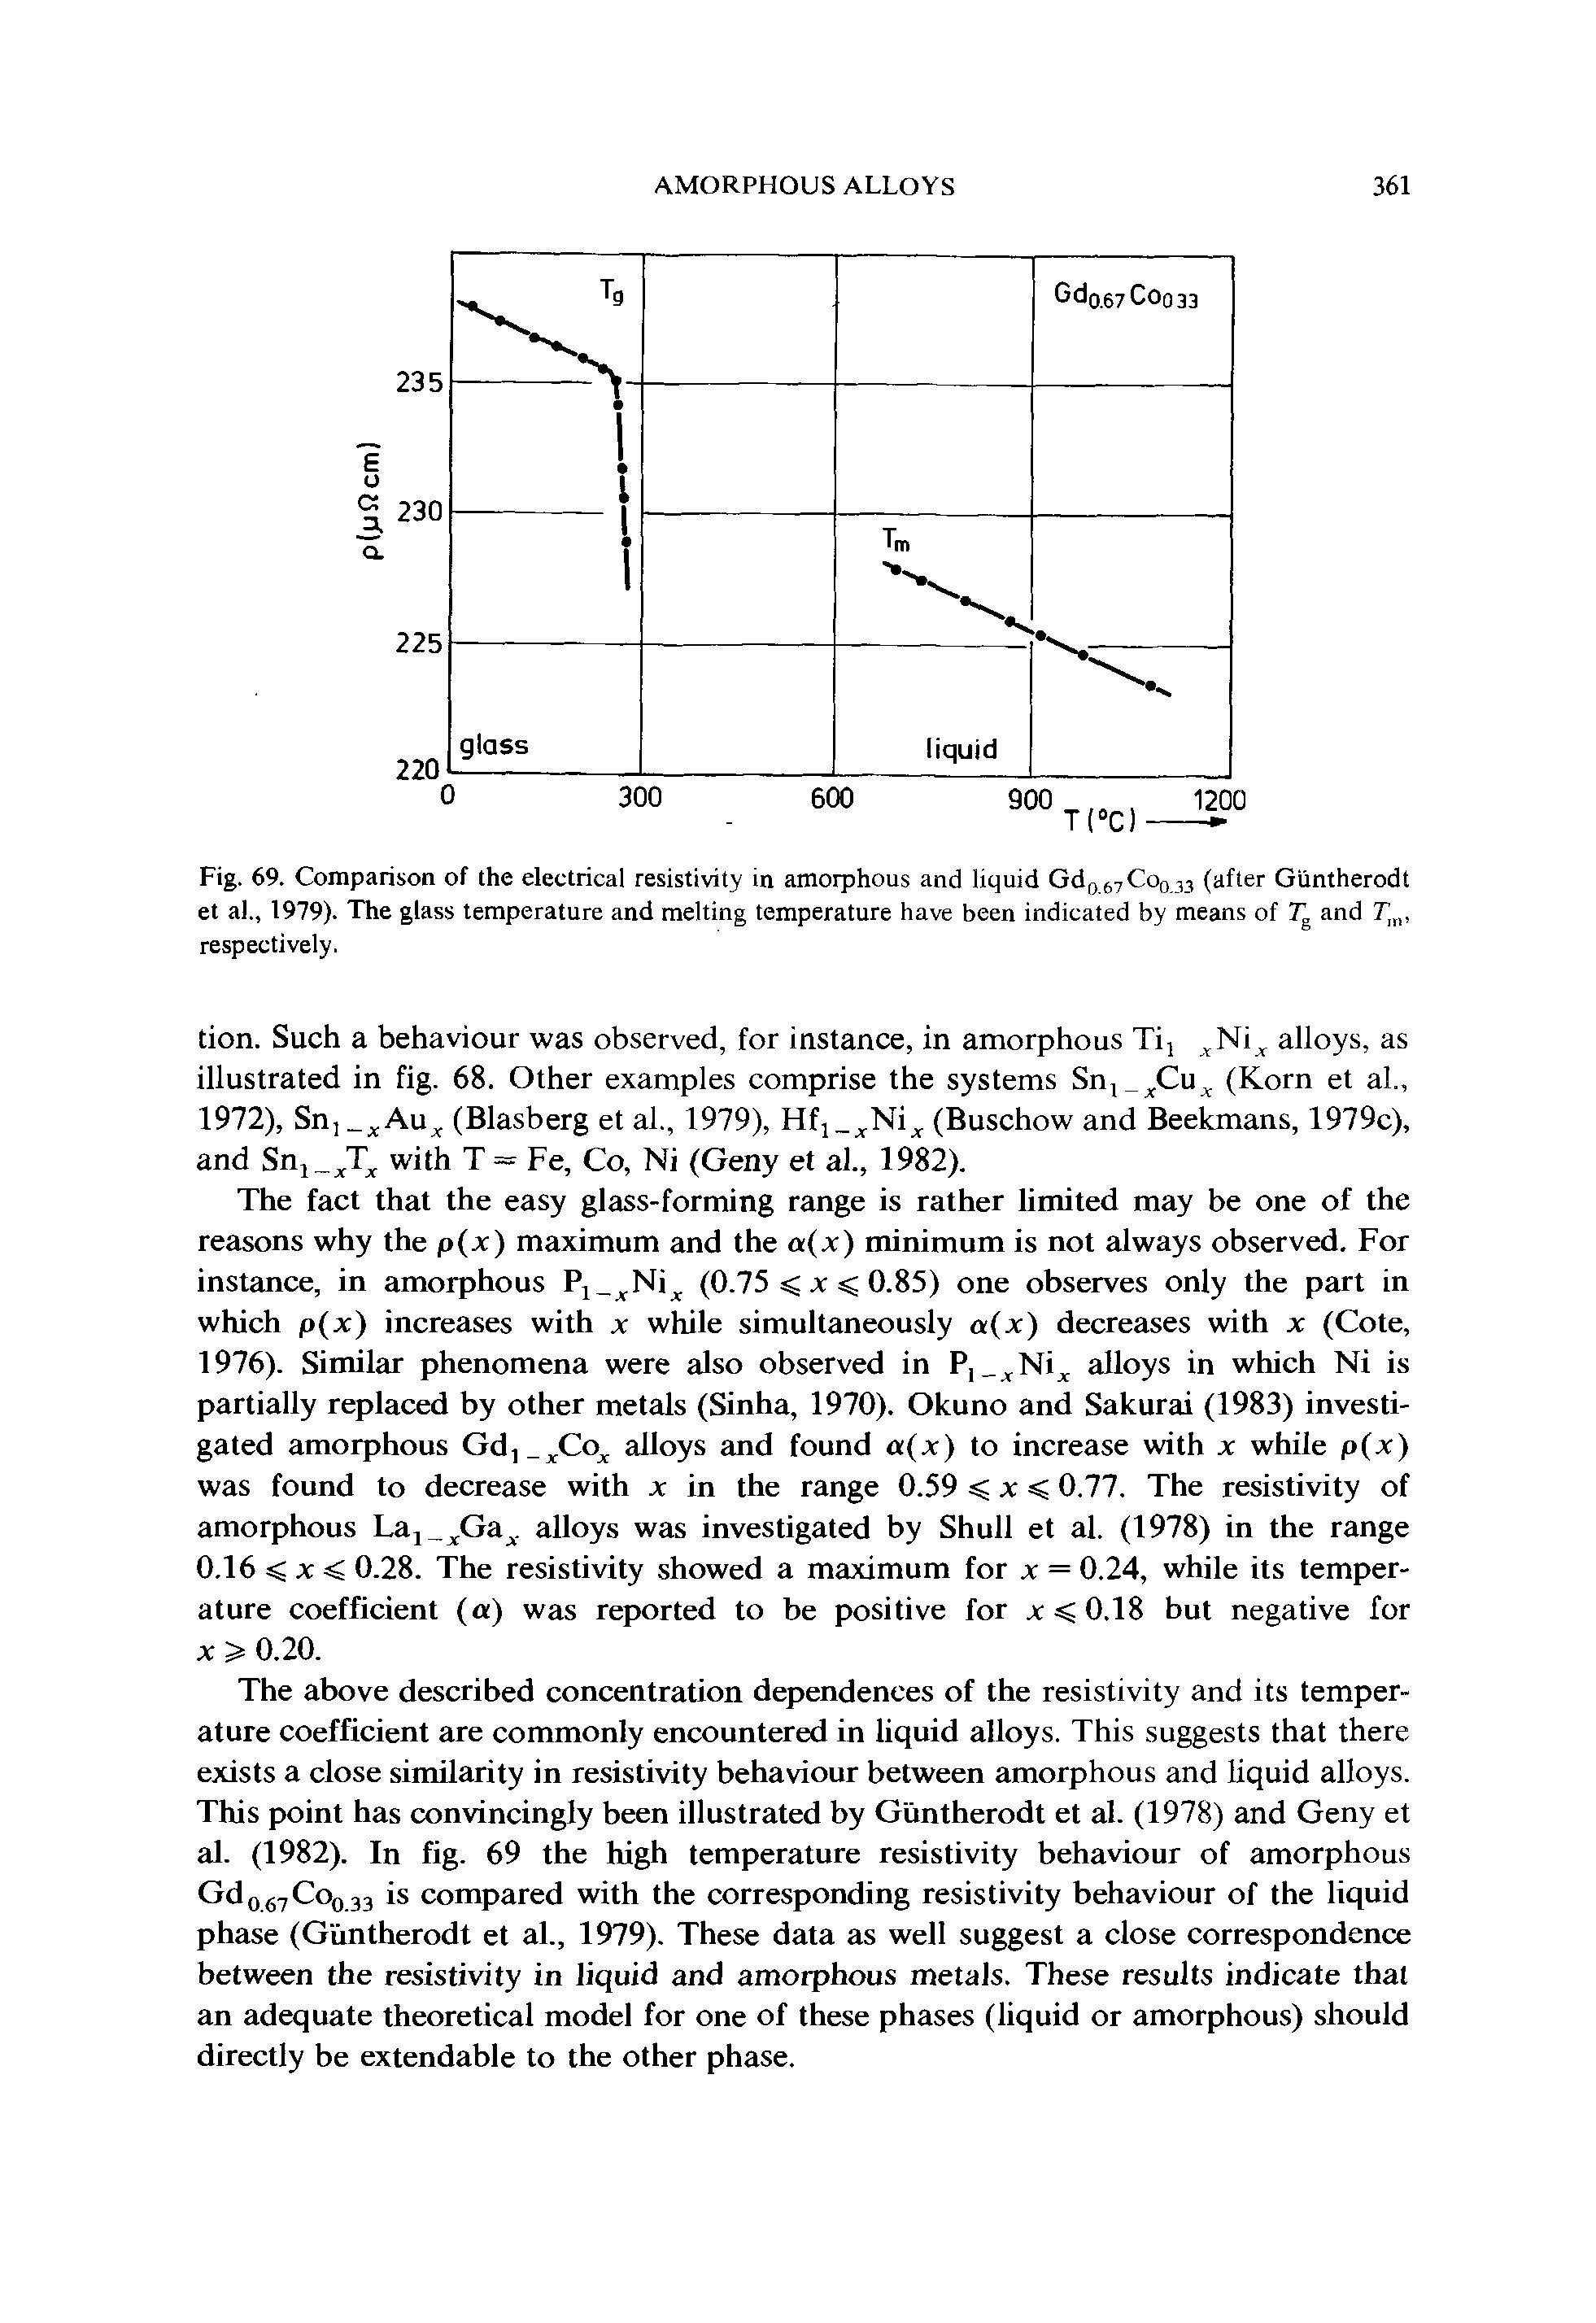 Fig. 69. Comparison of the electrical resistivity in amorphous and liquid GdQ 7Coo33 (after Giintherodt et al., 1979). respectively.